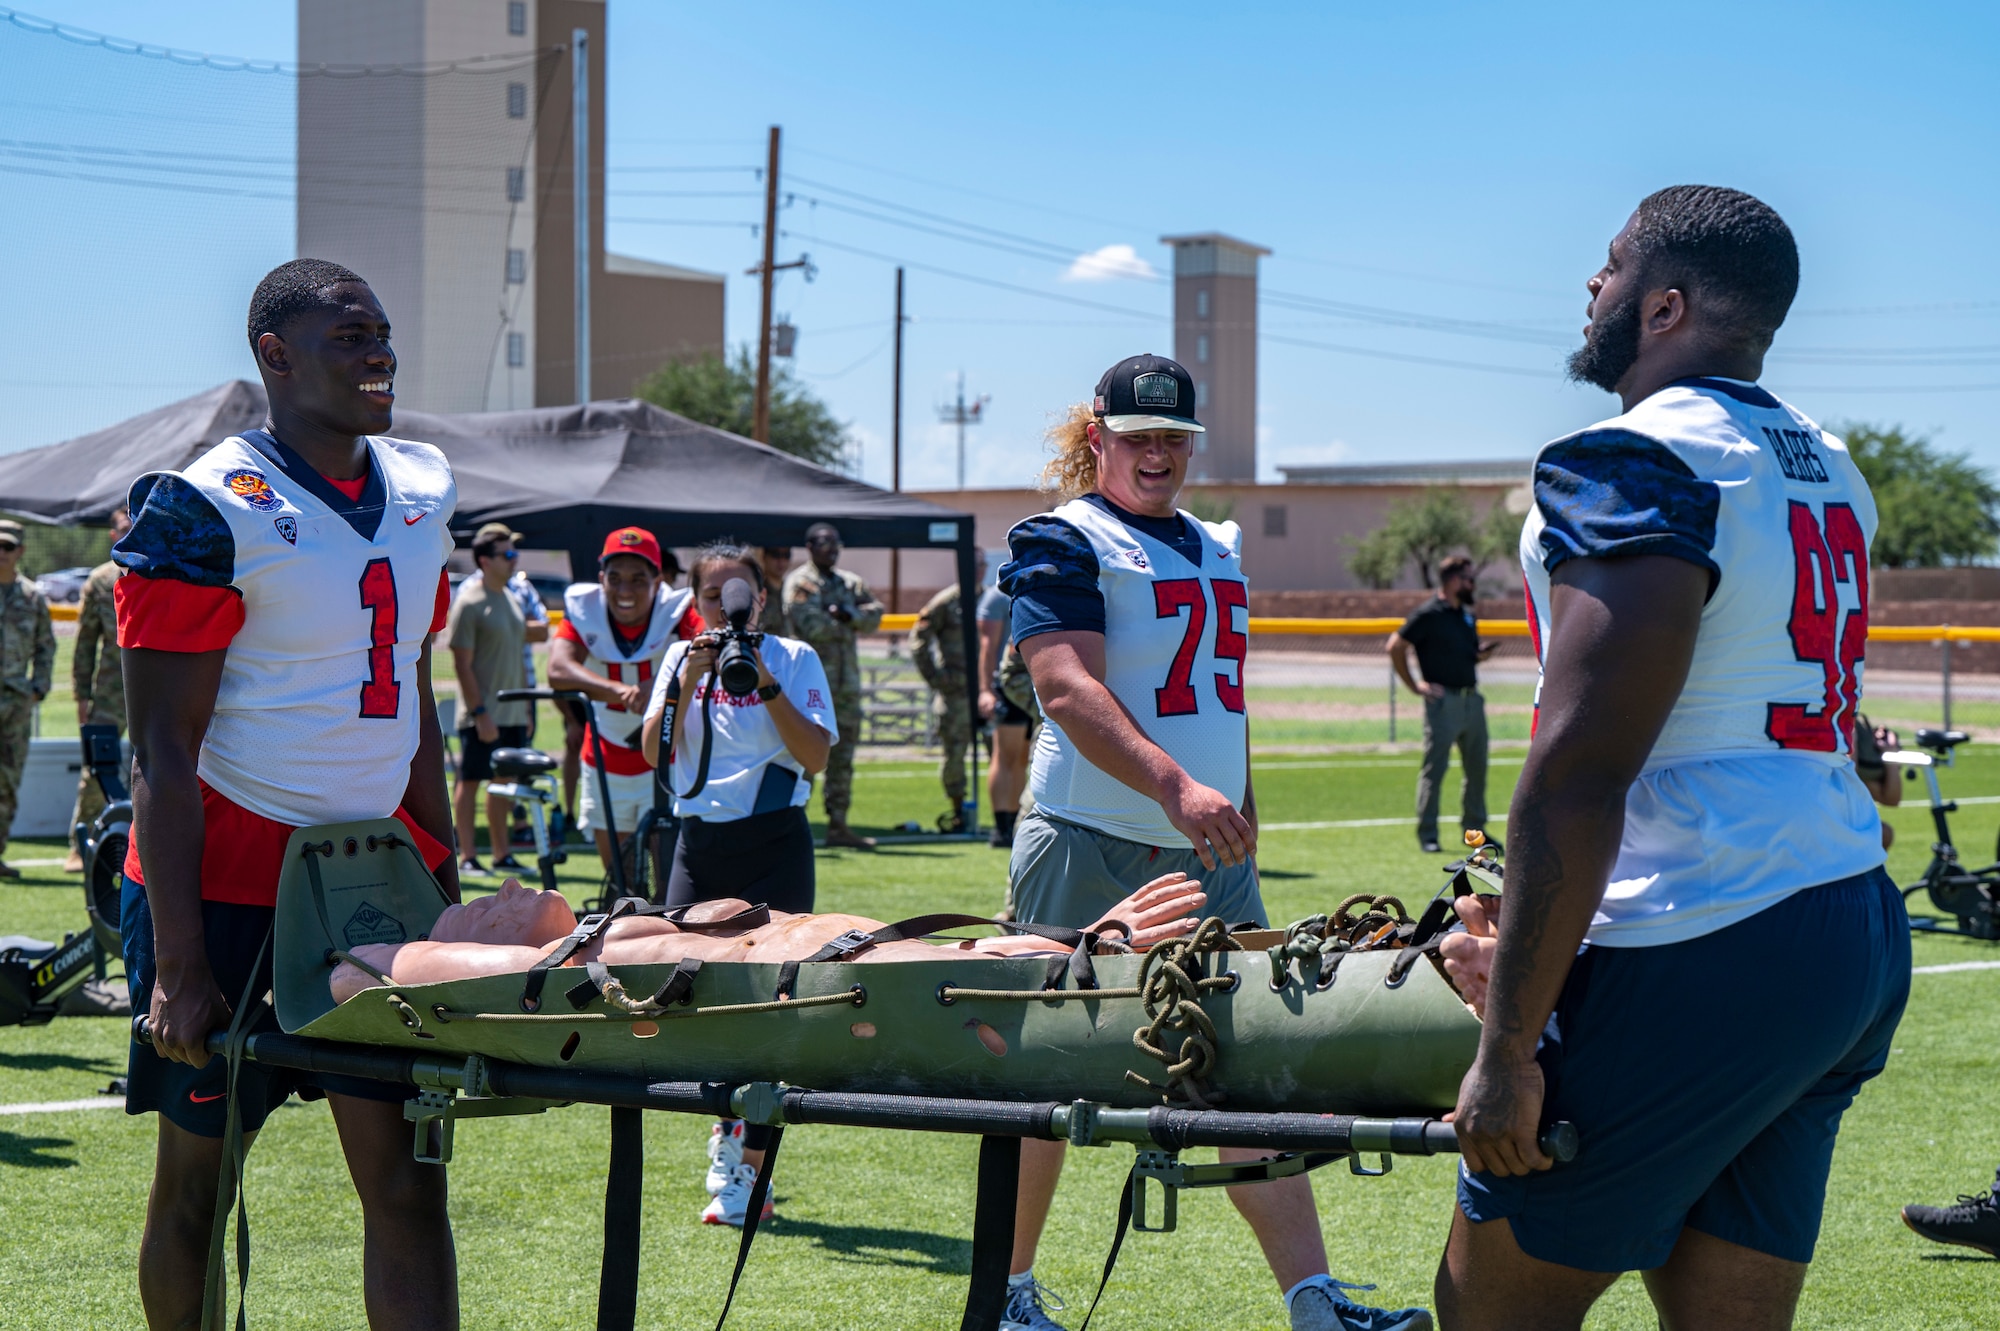 UofA players carry a simulated patient